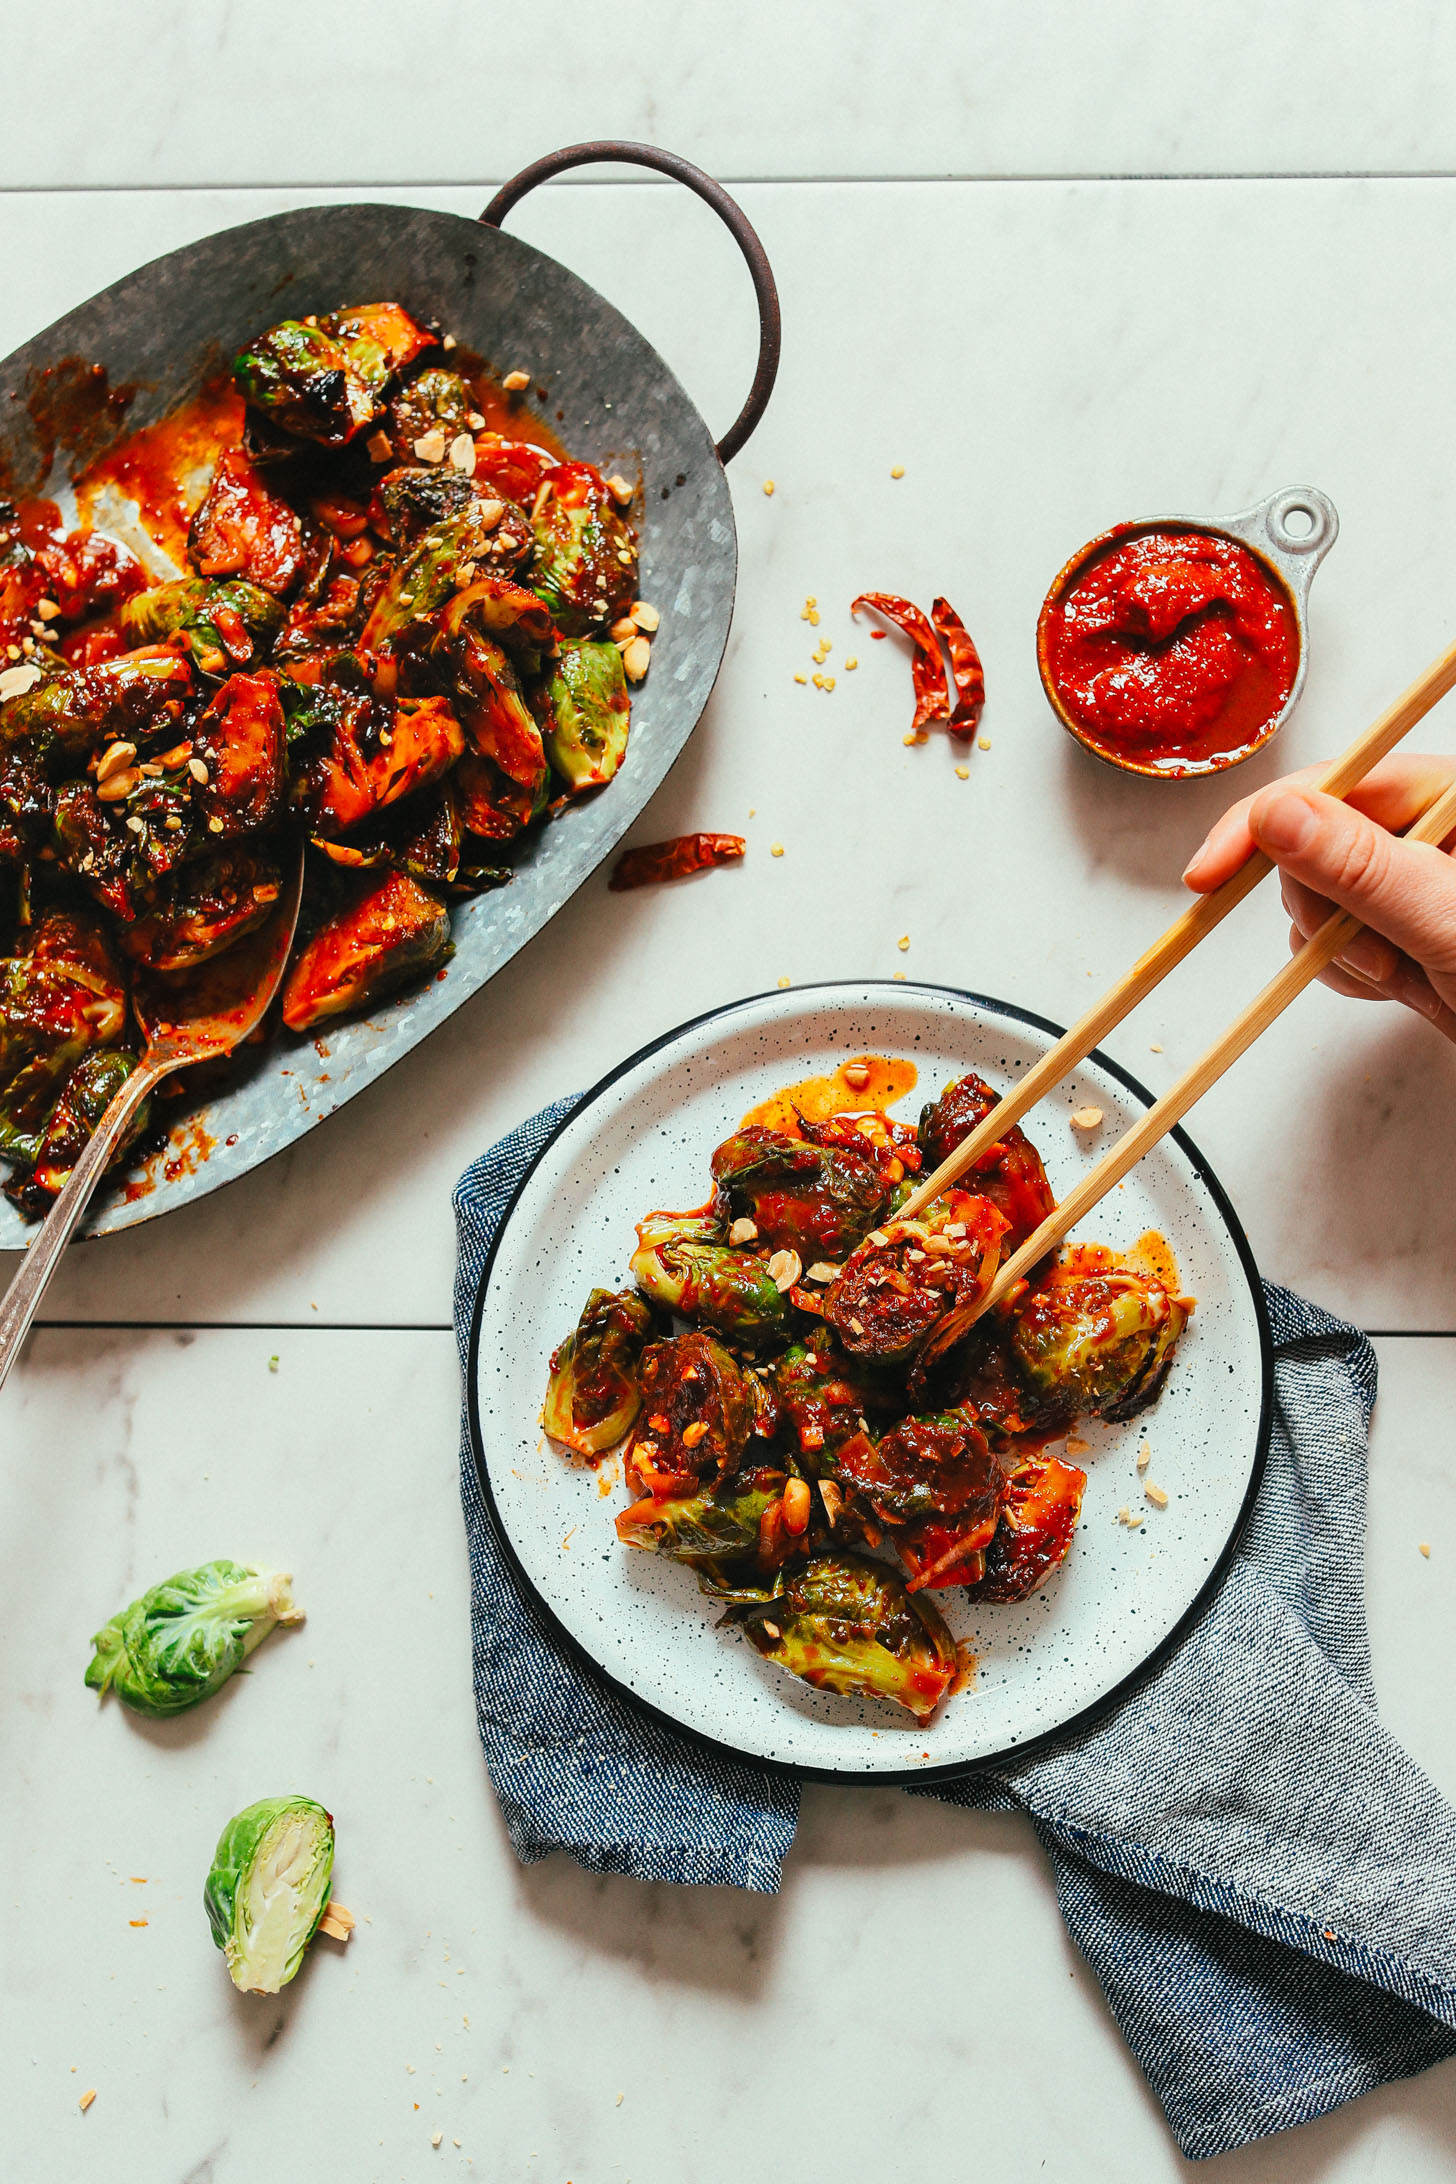 A plate and platter of our vegan Gochujang Stir-Fried Brussels Sprouts